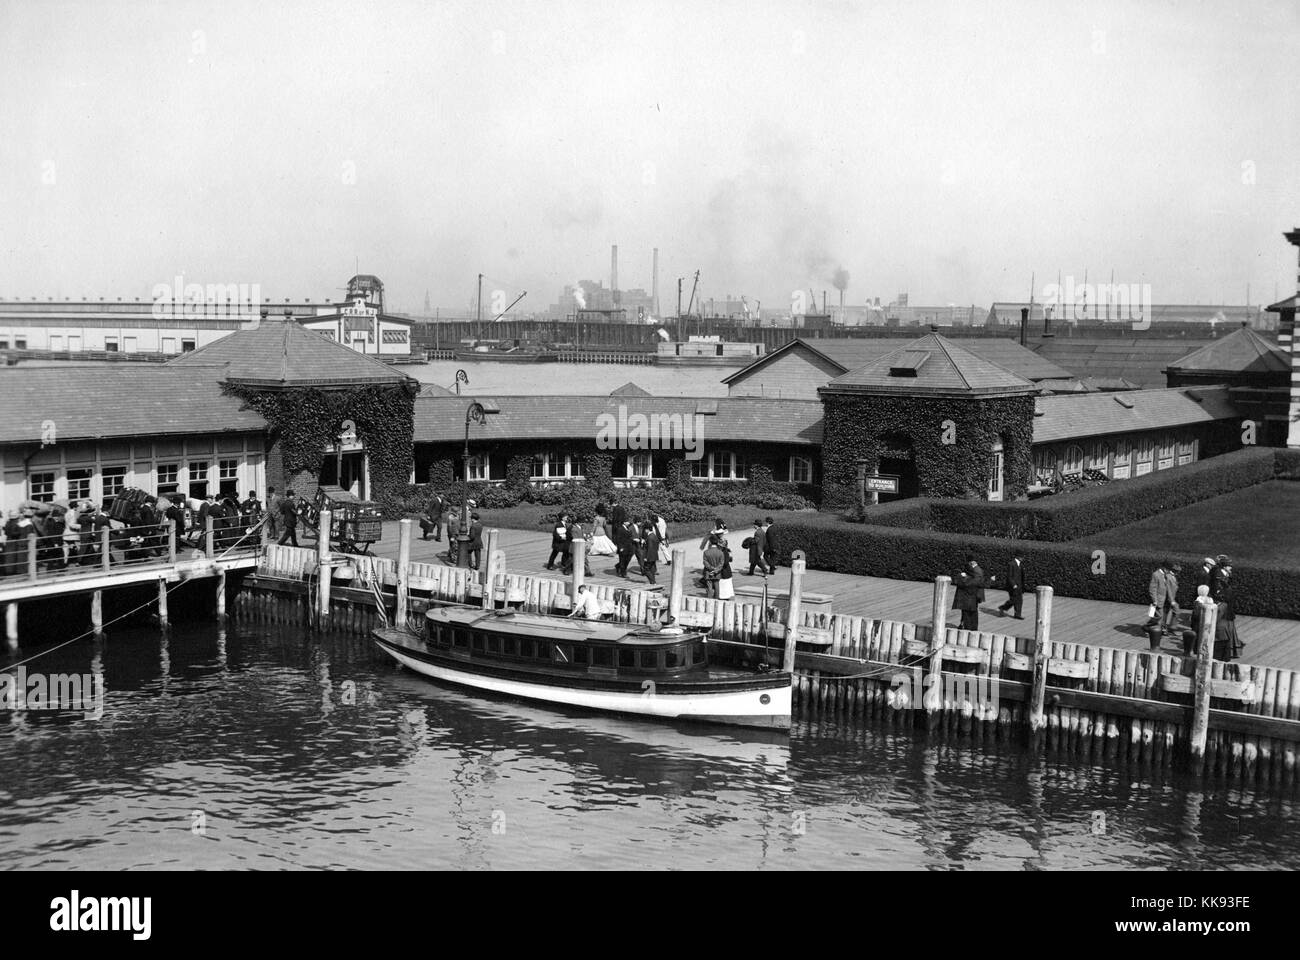 Black and white photograph of buildings near Ellis Island pier, immigrants can be seen on the boardwalk with trunks and luggage, by Edwin Levick, Ellis Island, New York, 1907. From the New York Public Library. Stock Photo